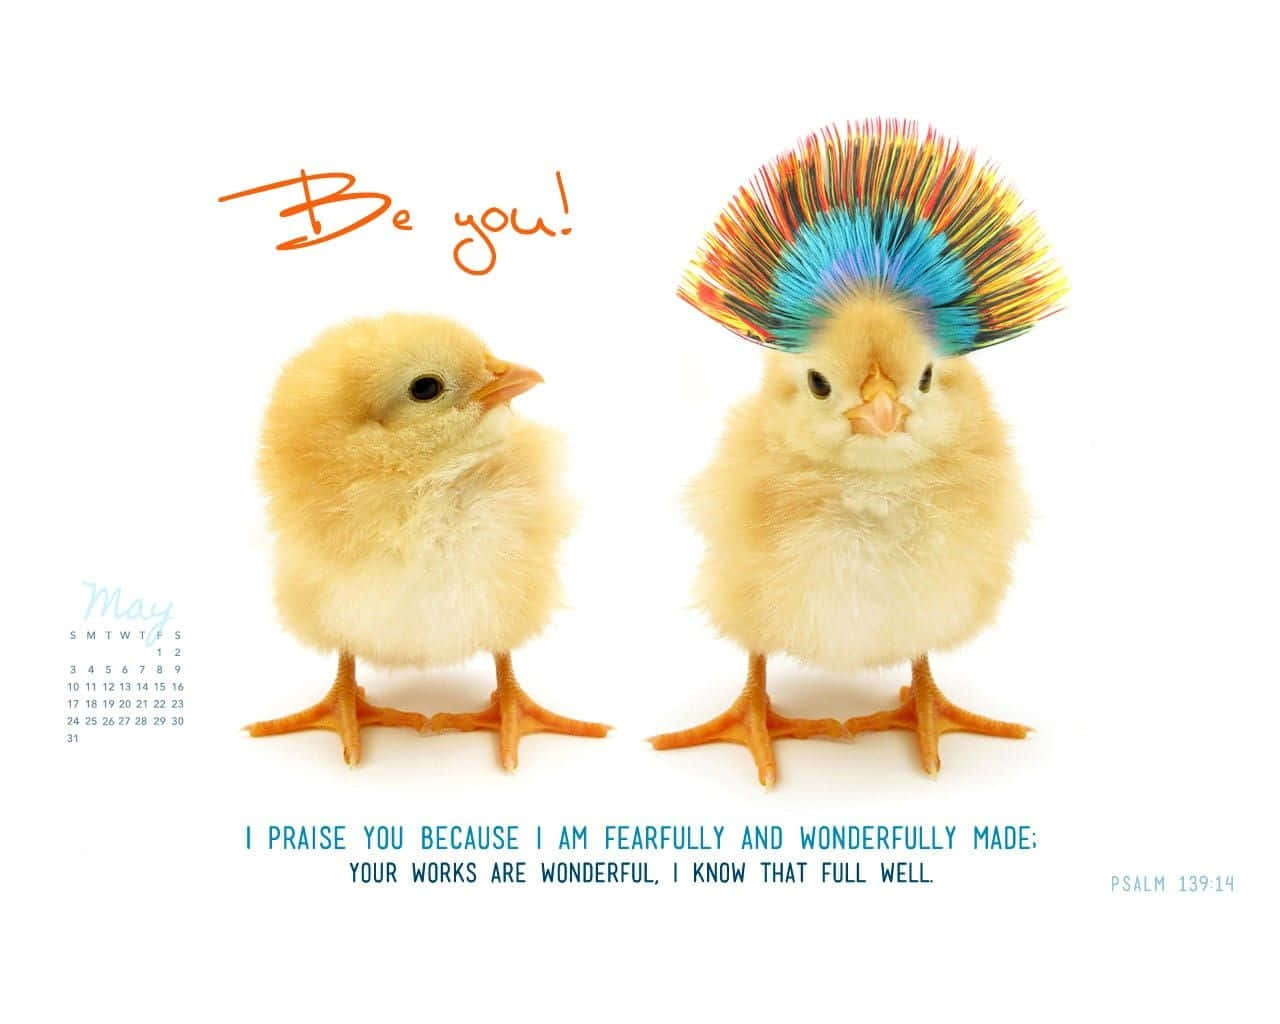 Two Chickens With Colorful Hair On Their Heads Wallpaper